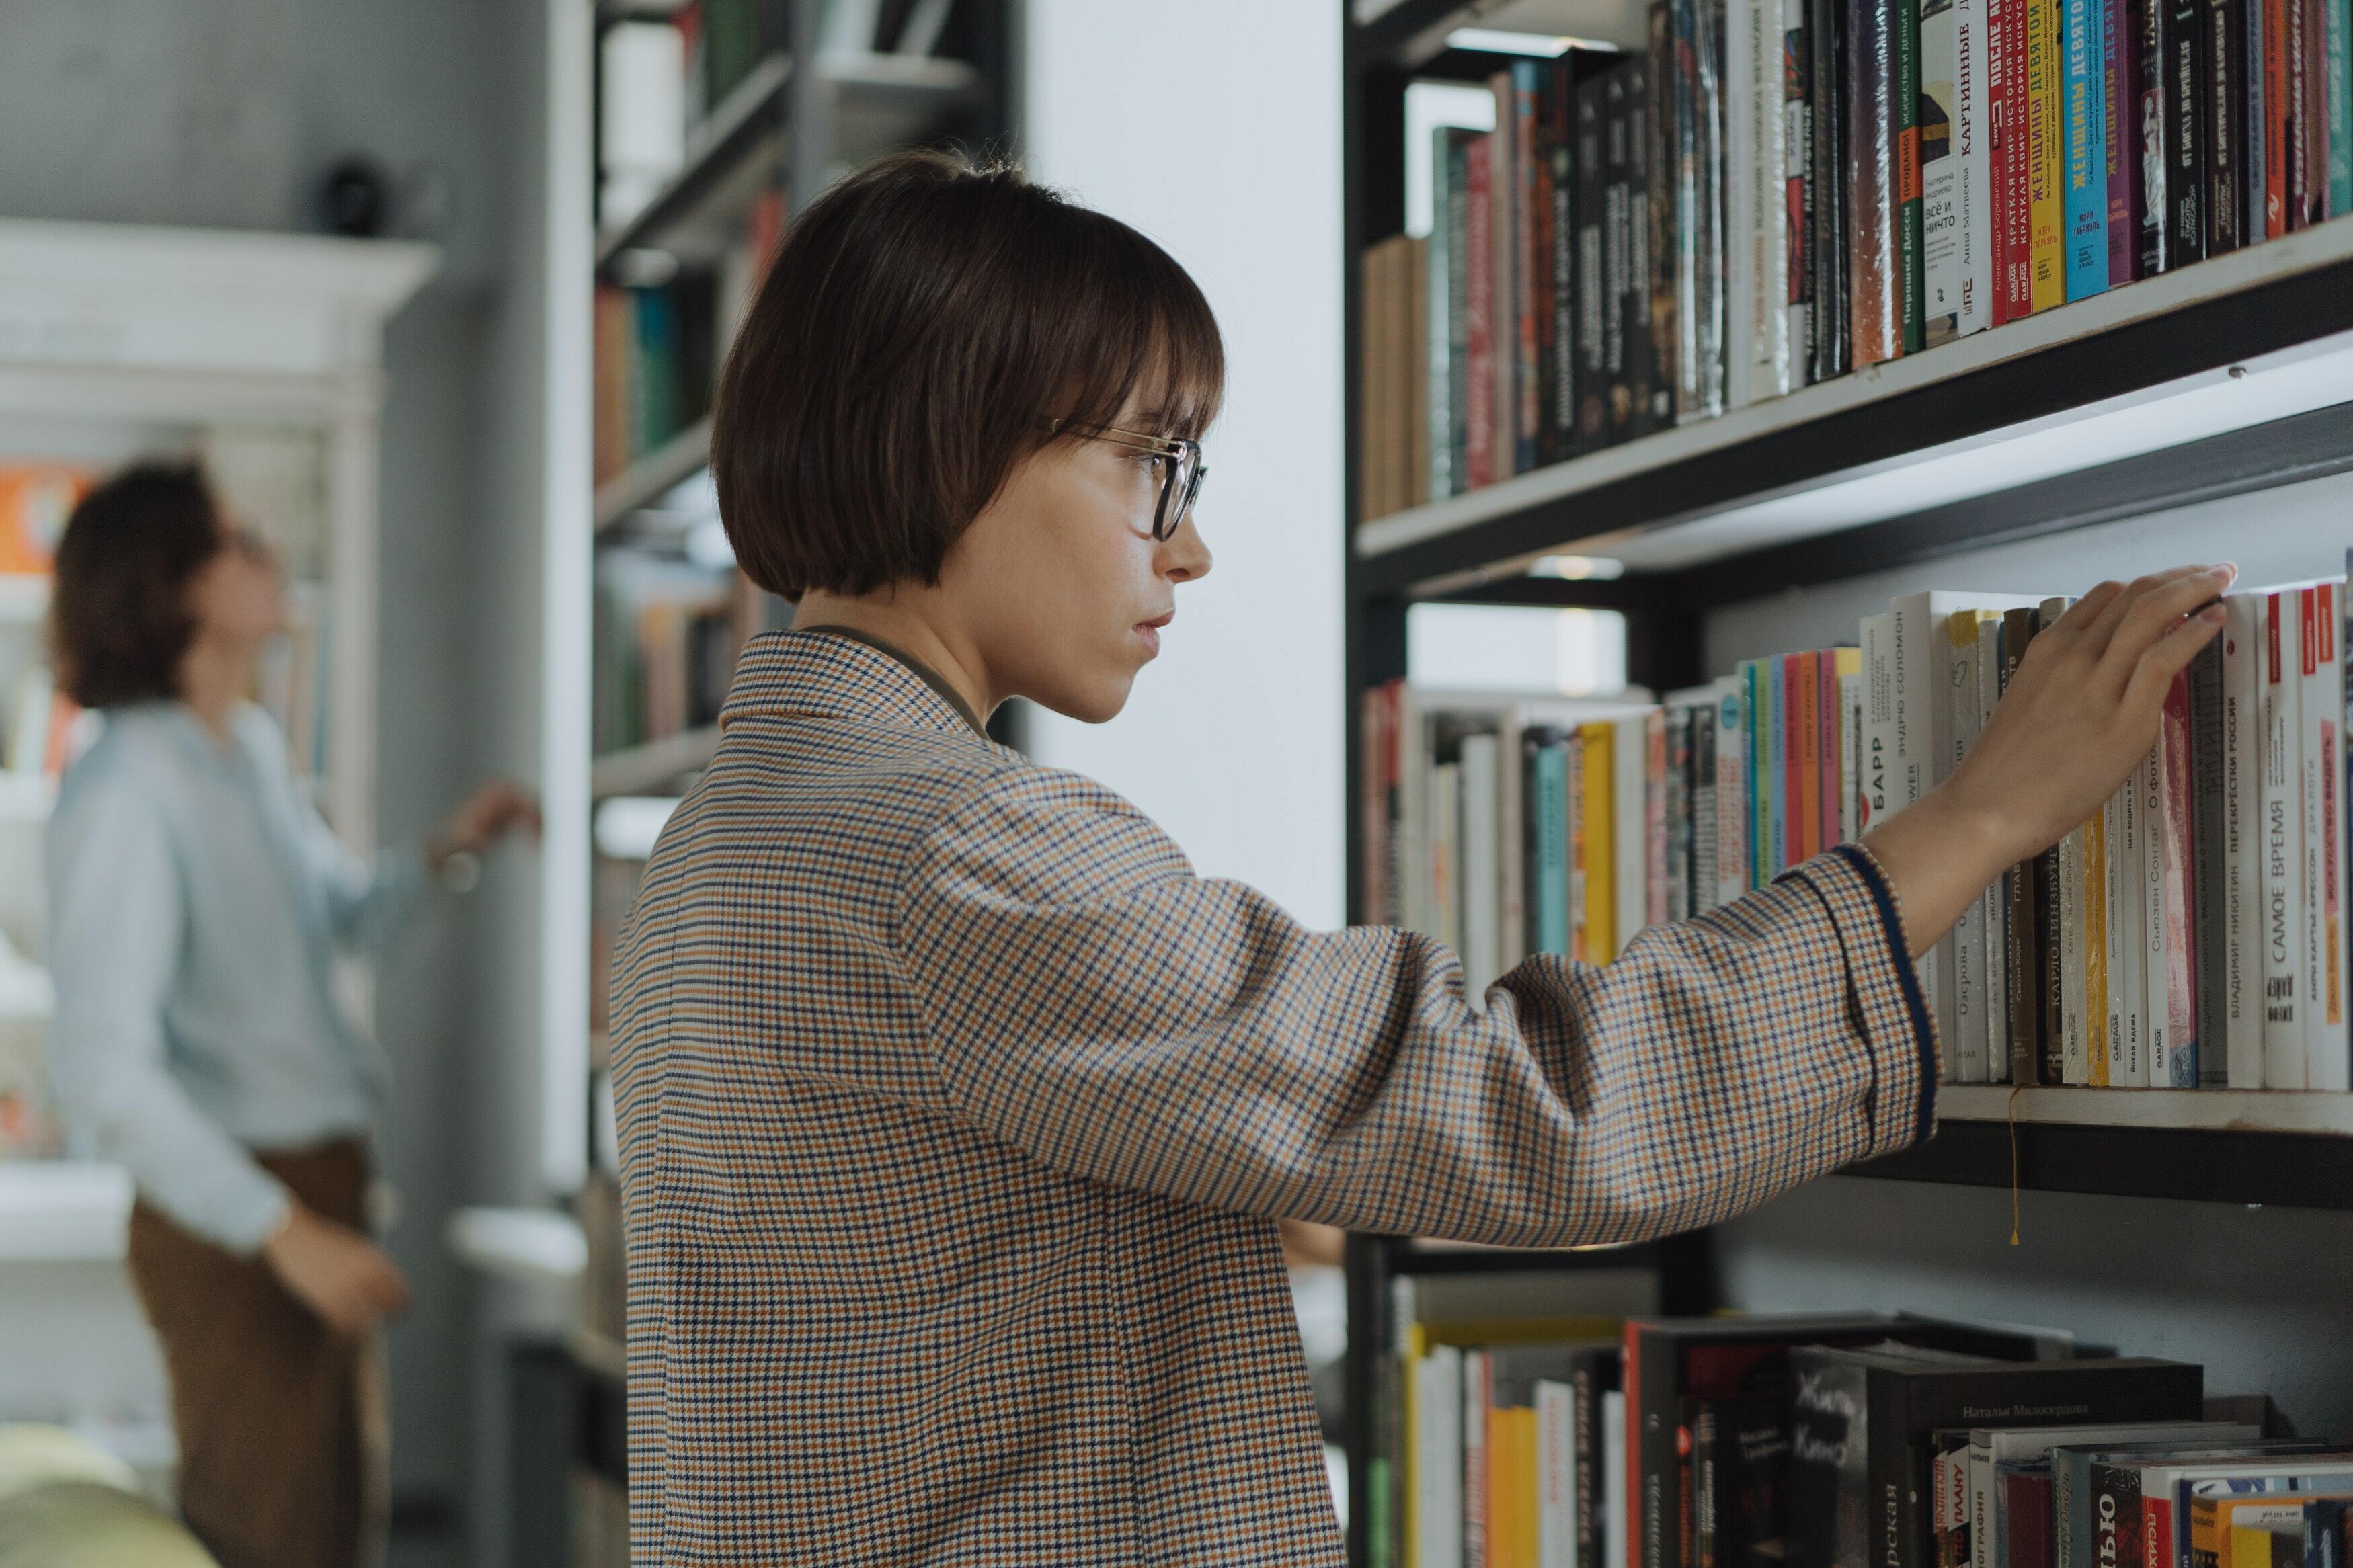 A woman scrolling through a library of books